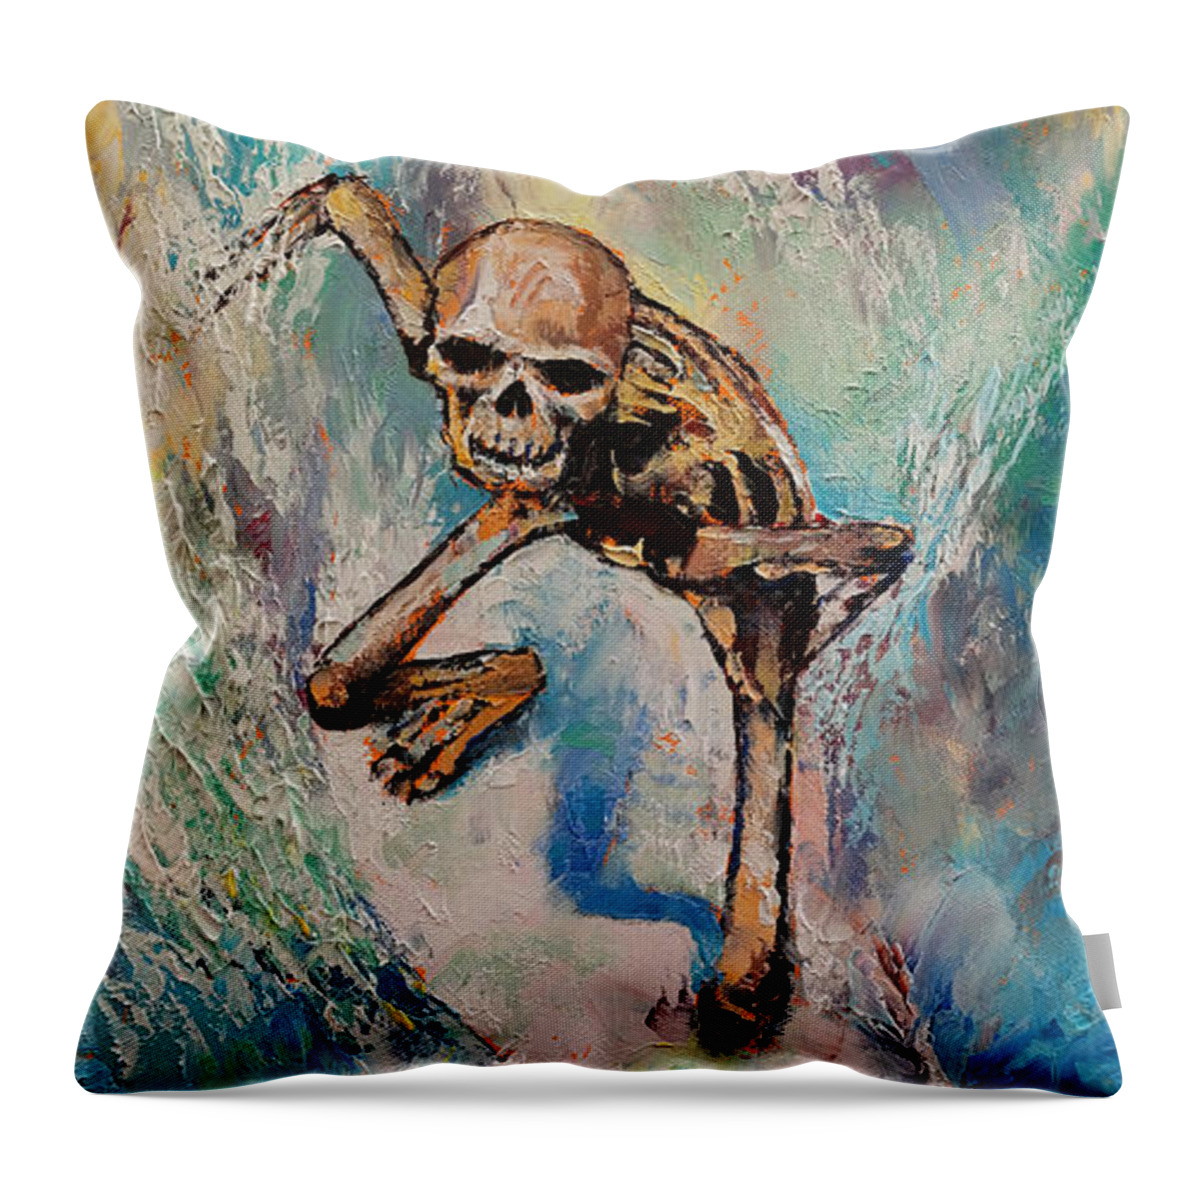 Skull Throw Pillow featuring the painting Surfer by Michael Creese